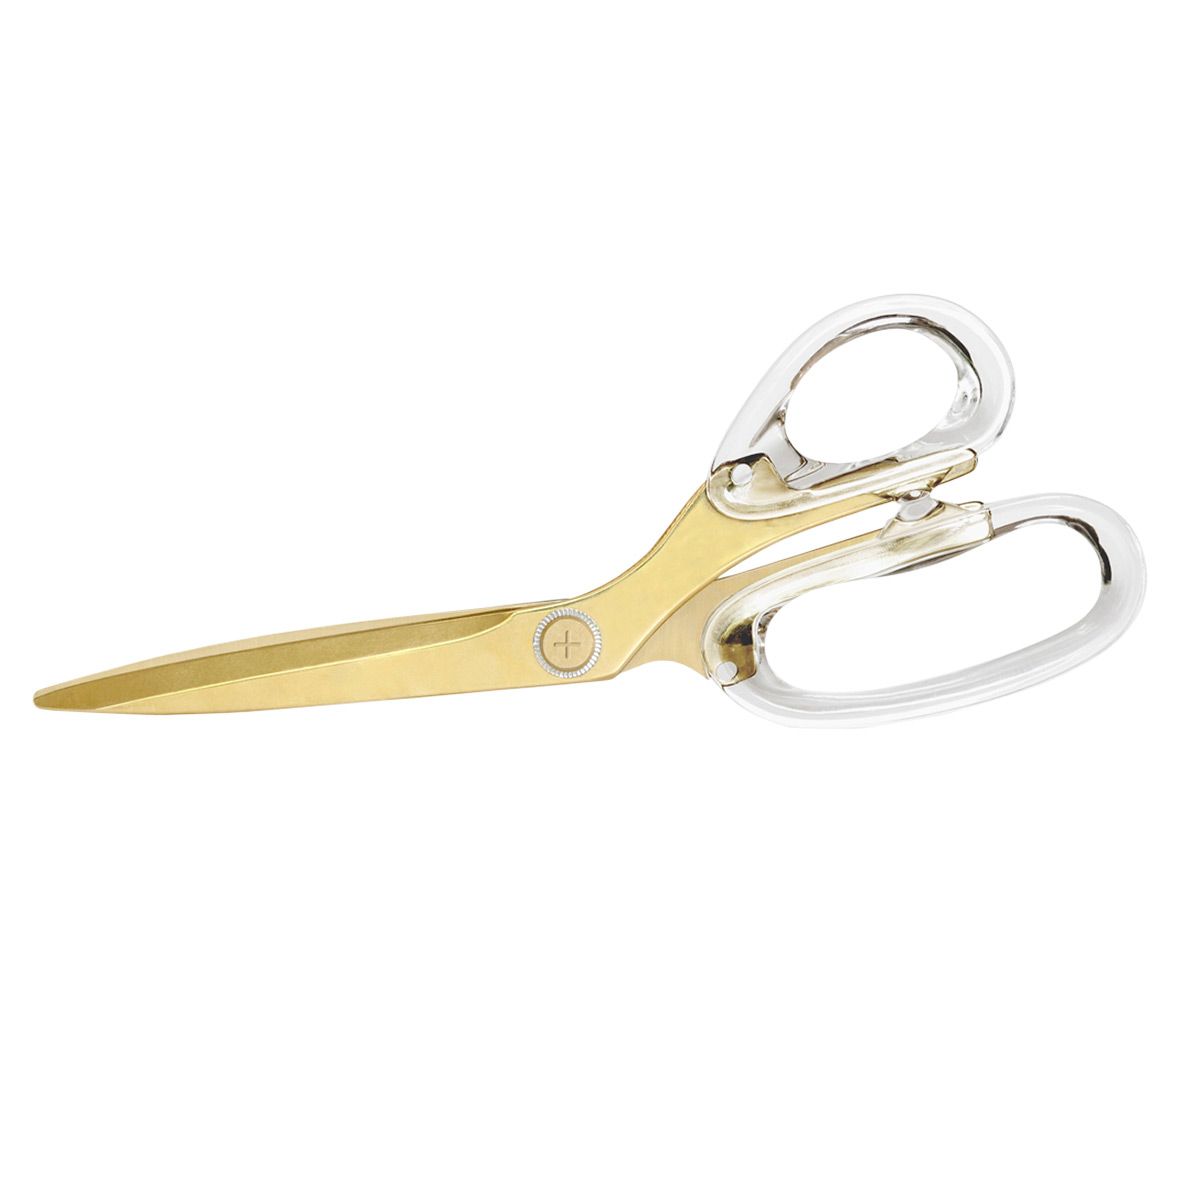 Russell + Hazel  Acrylic Scissors | The Container Store